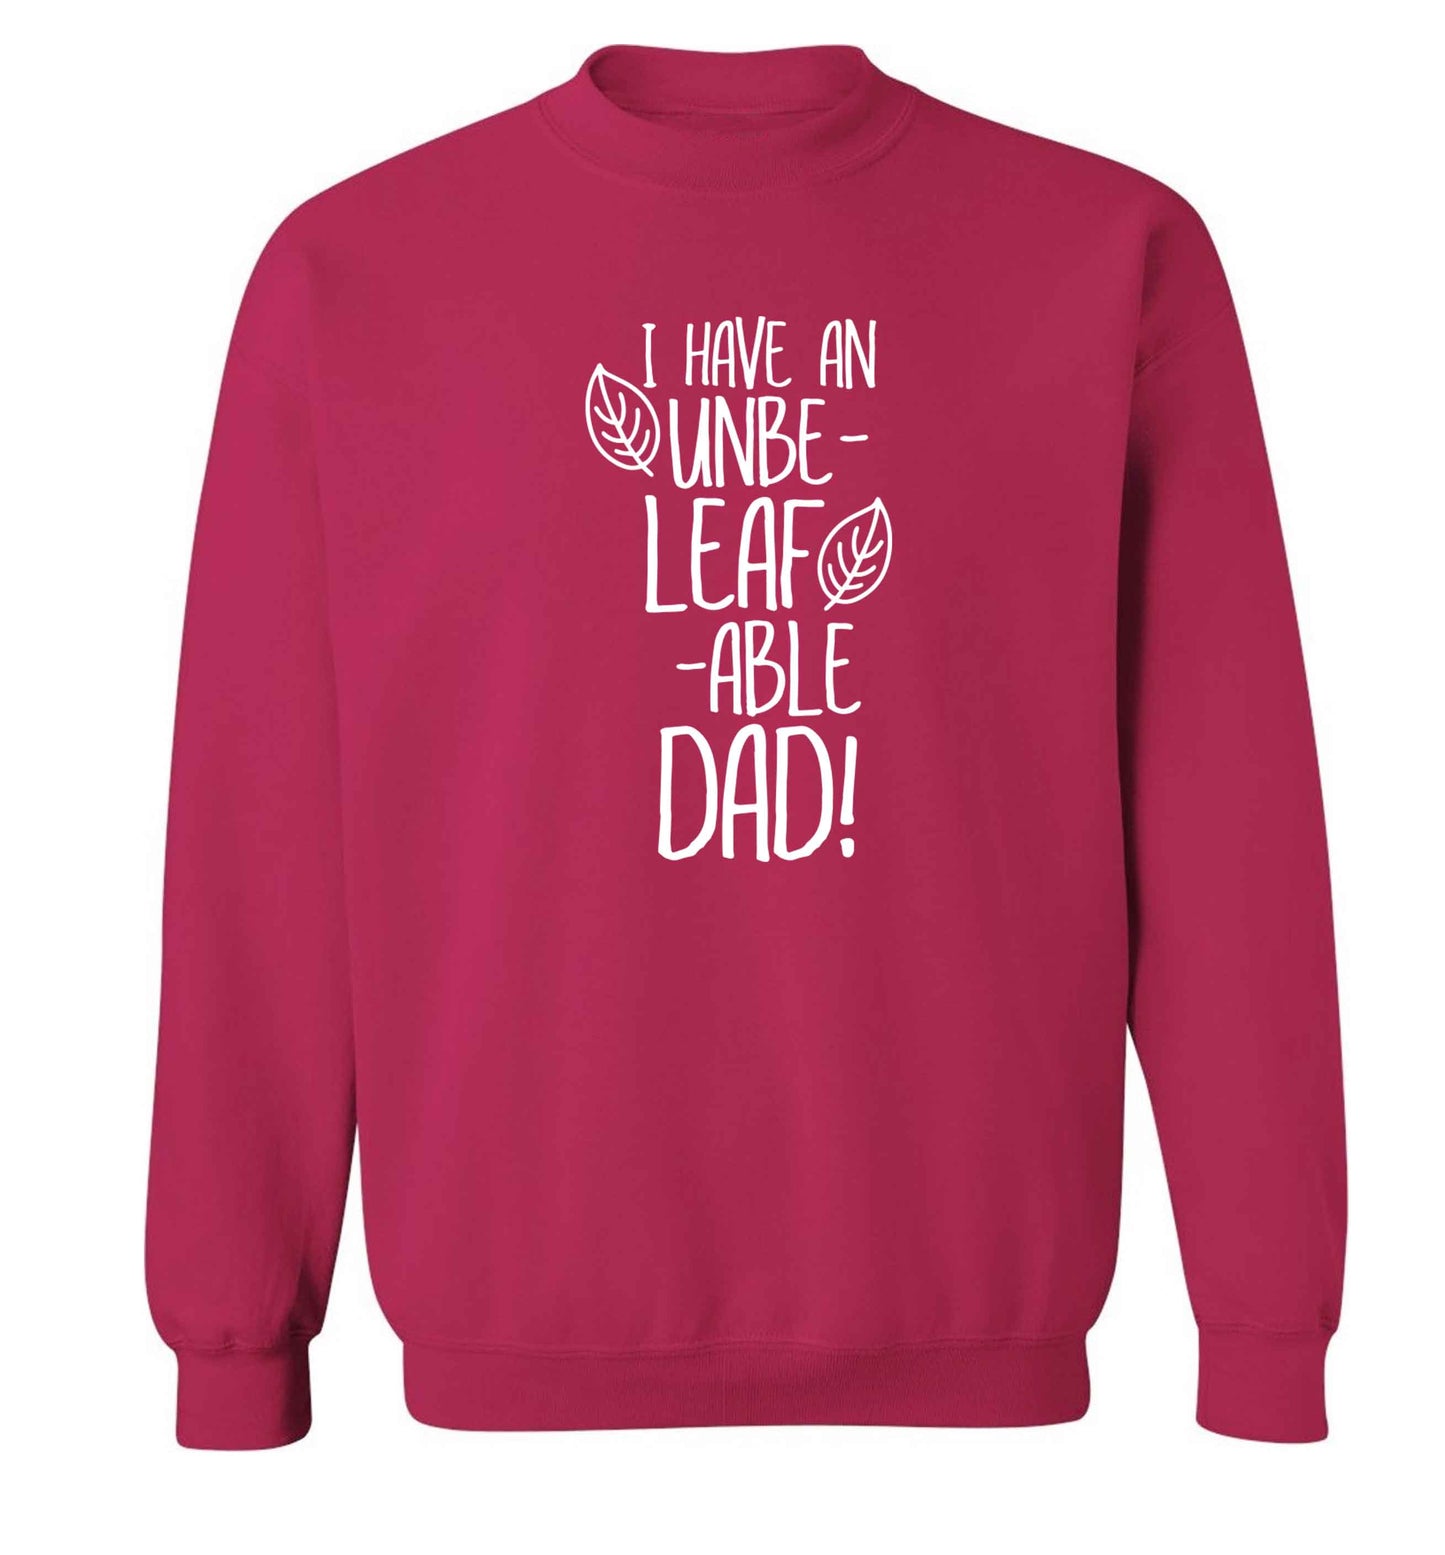 I have an unbe-leaf-able dad Adult's unisex pink Sweater 2XL